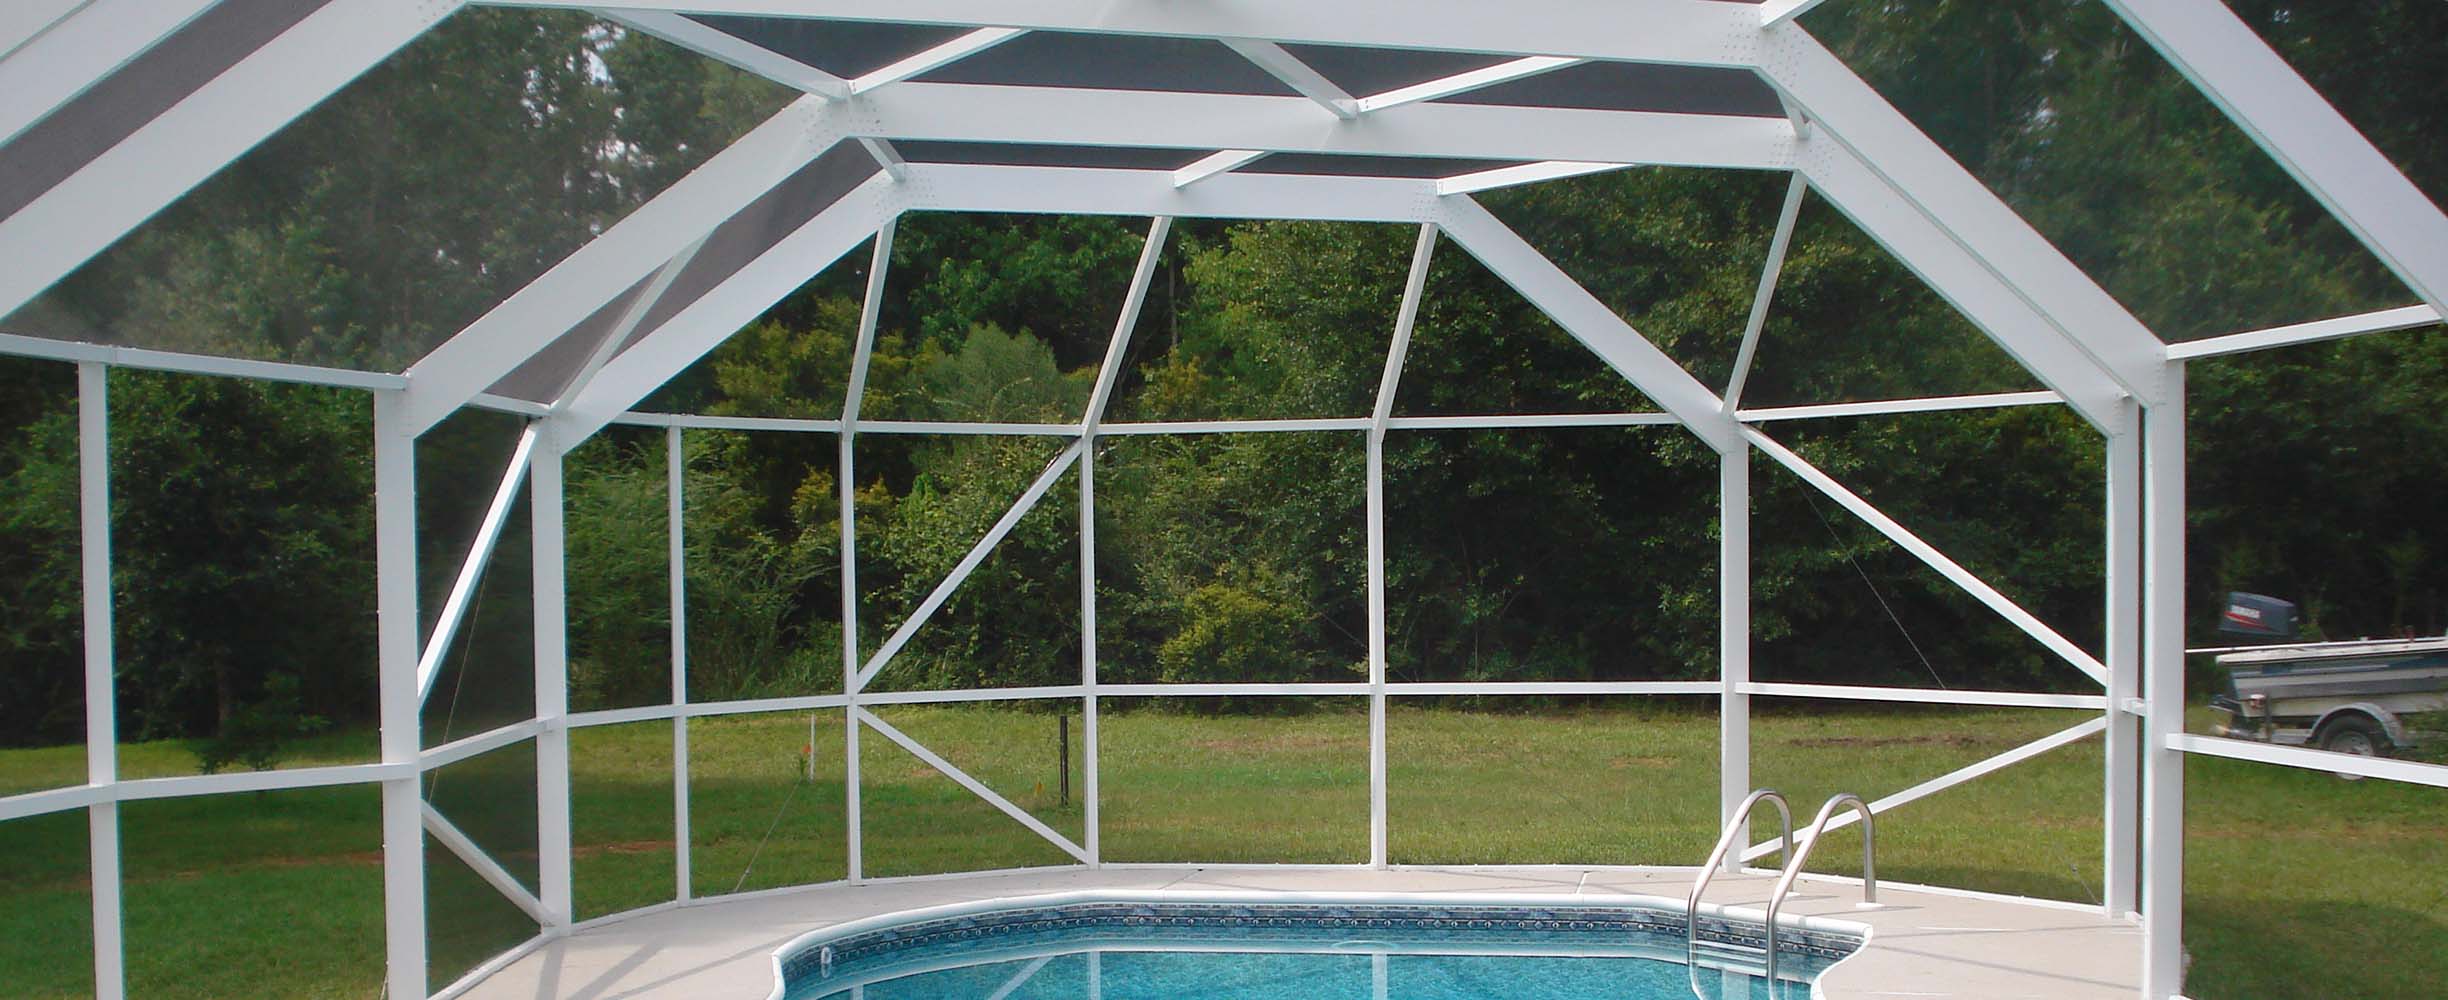 Pool enclosure specifically designed to fit th epool and top stand the Southern weather